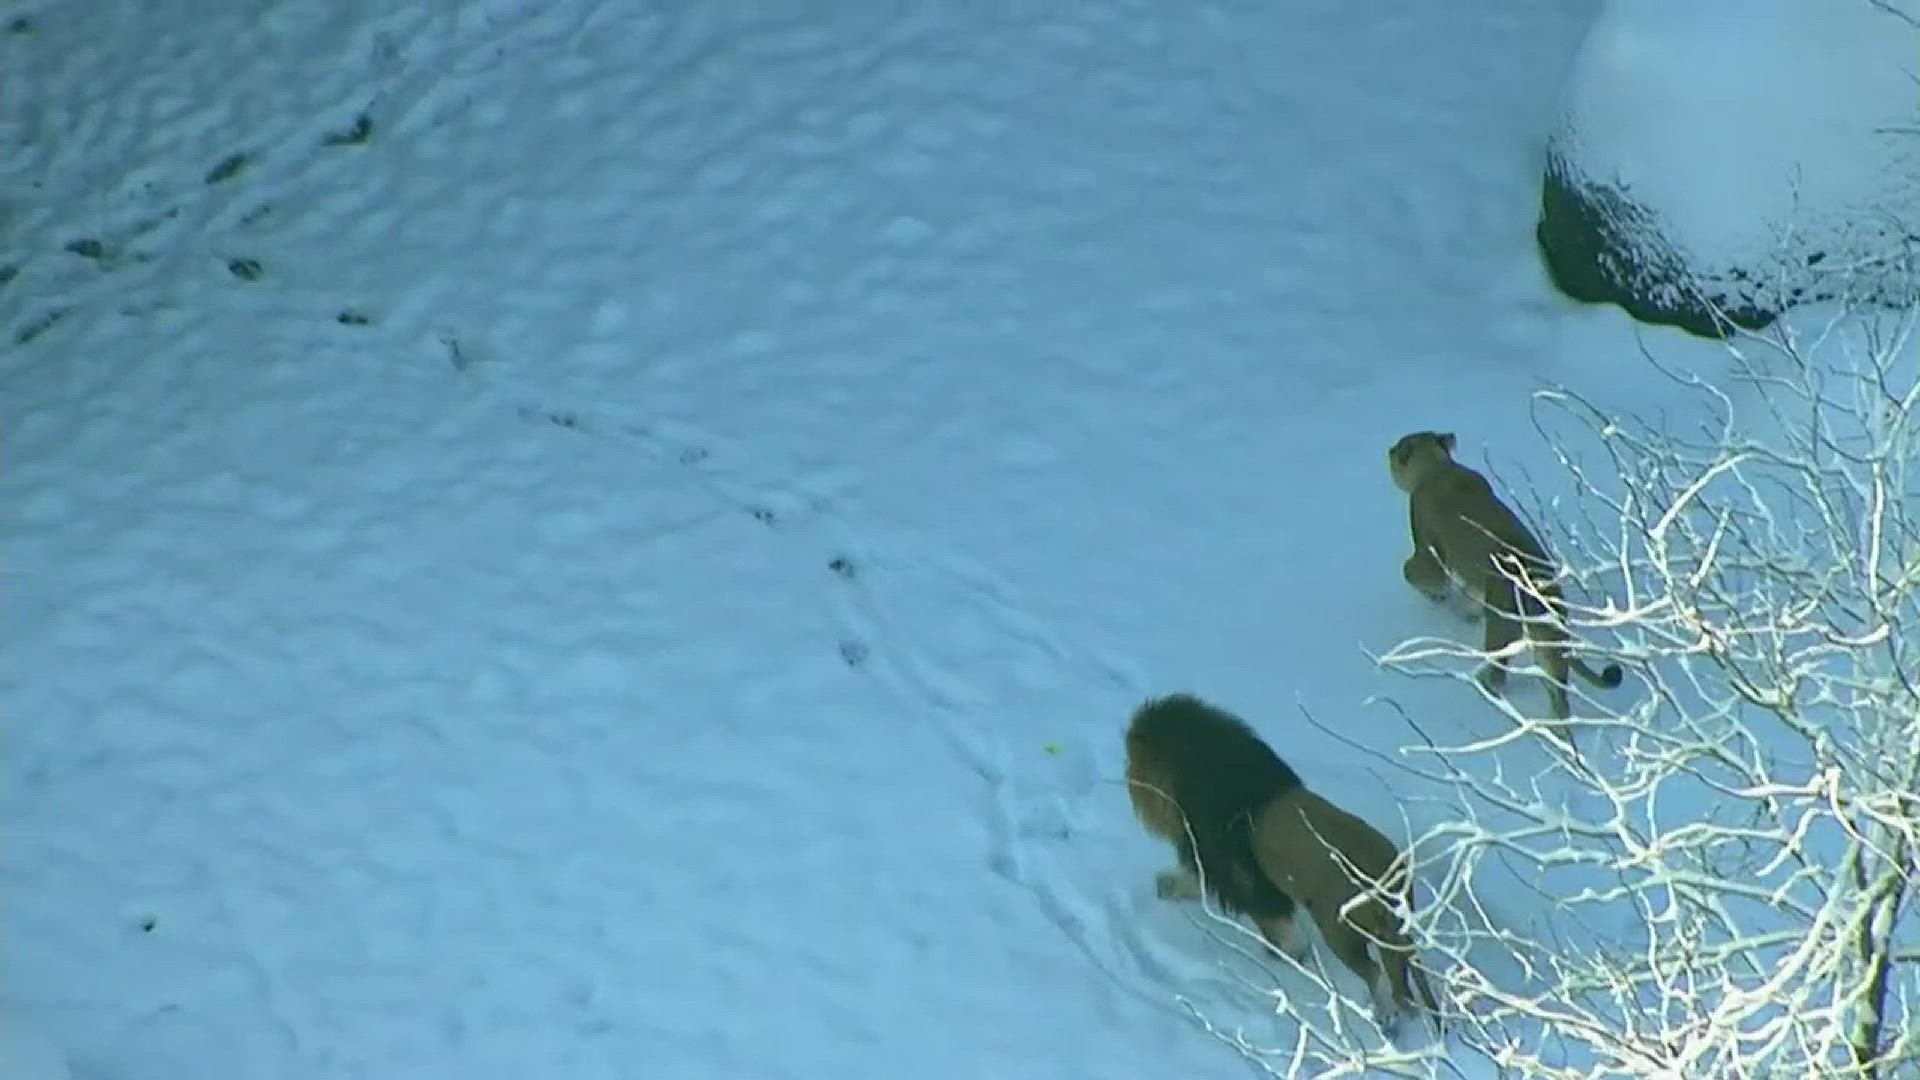 Sky 8 caught the lions at the Oregon Zoo playing in the snow this morning!